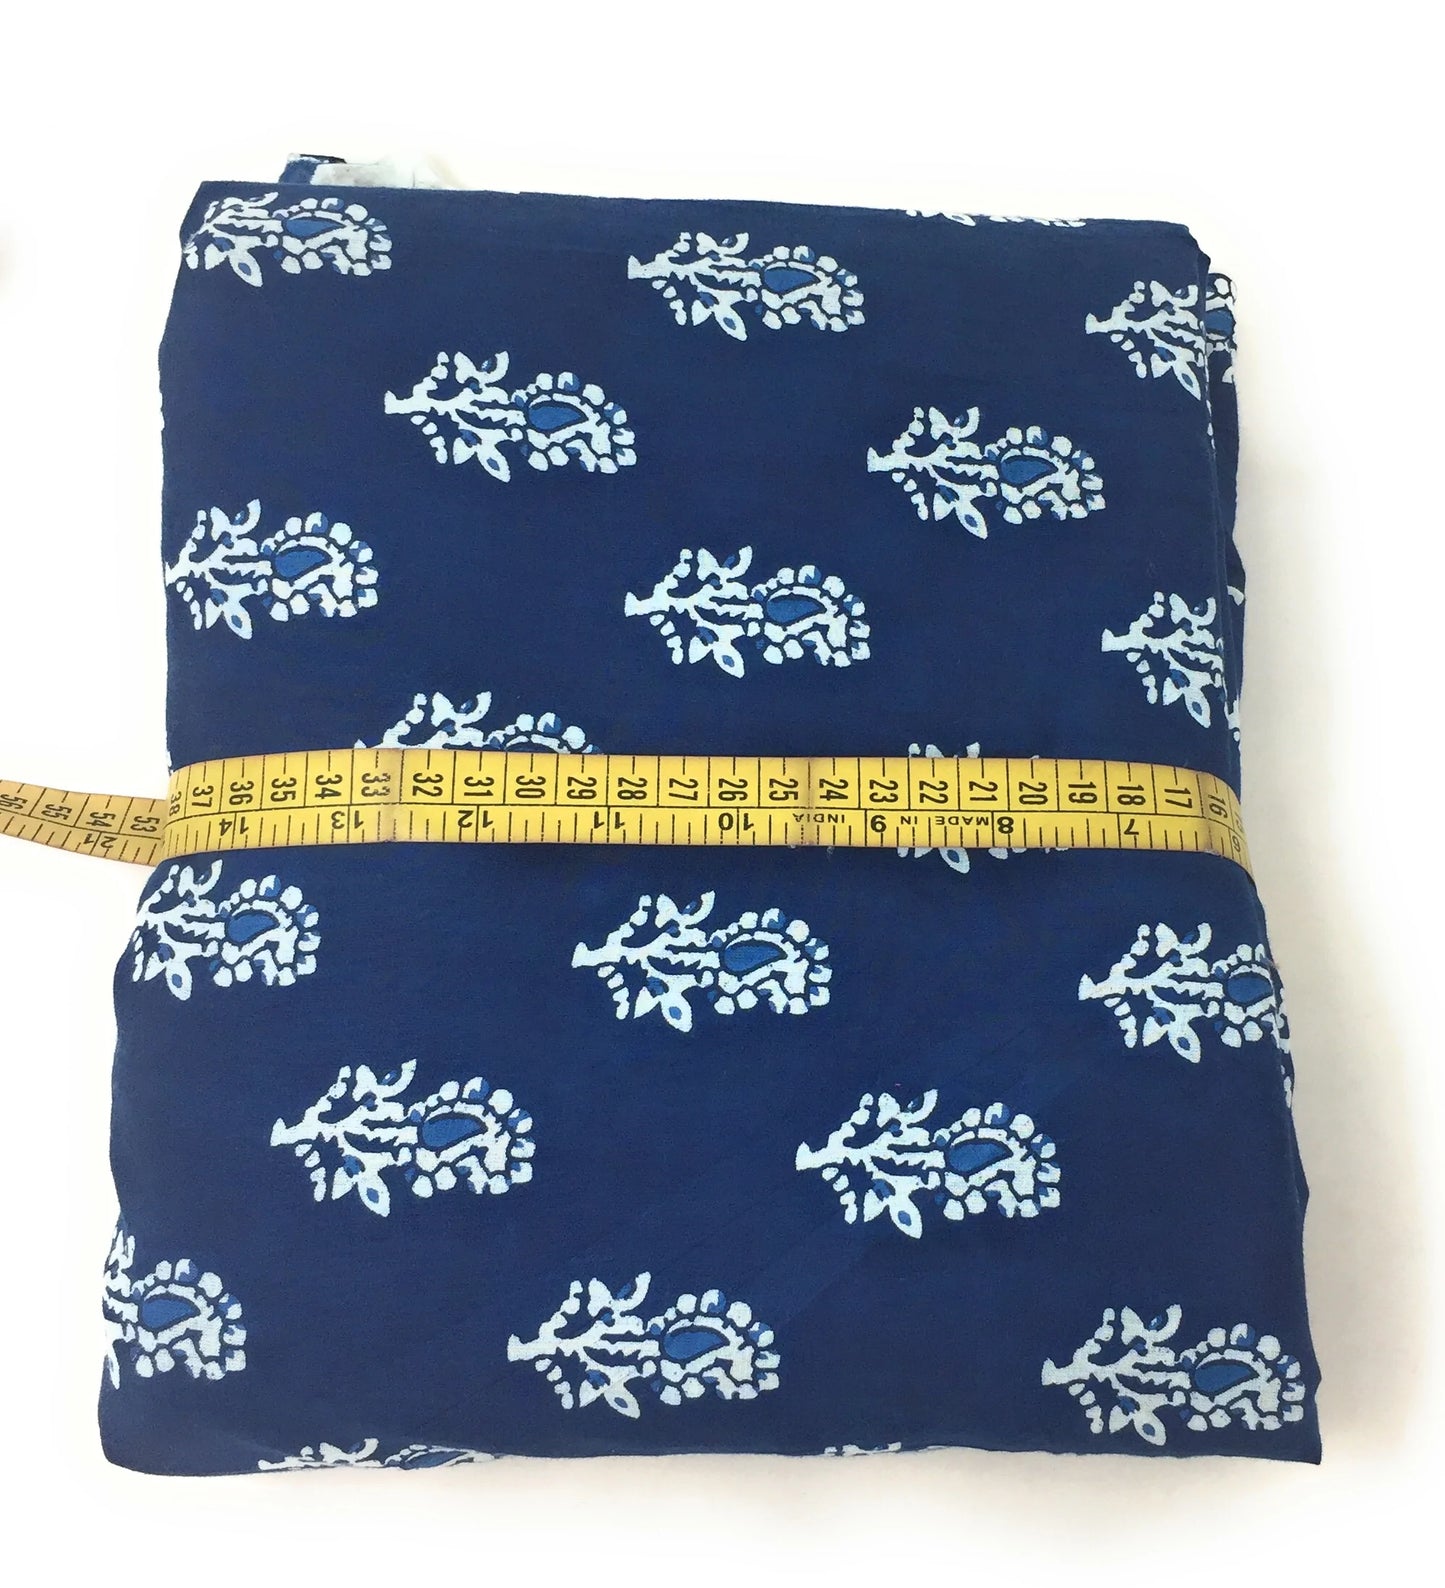 cotton printed material